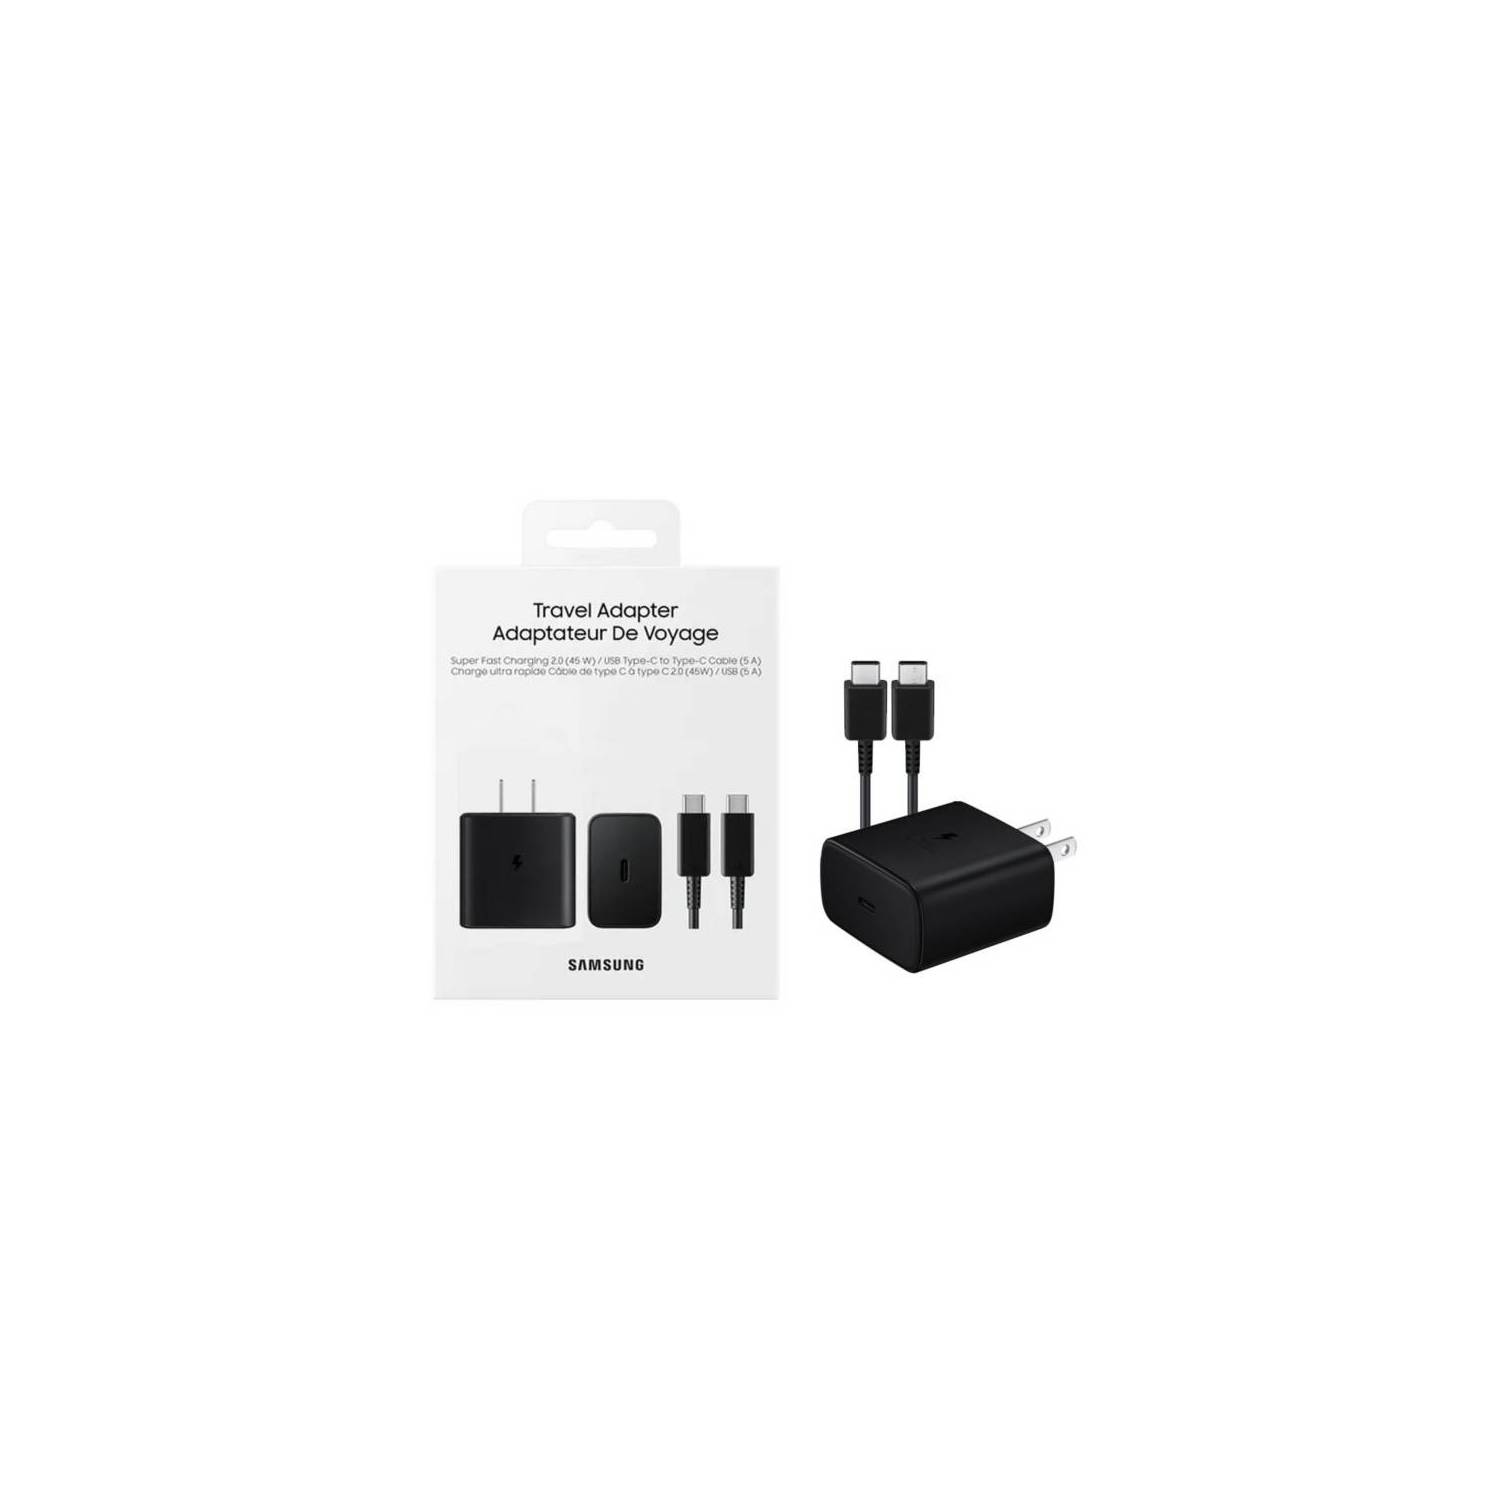 SAMSUNG SUPER FAST CHARGE CARGADOR 45W EP-TA845 CABLE USB-C